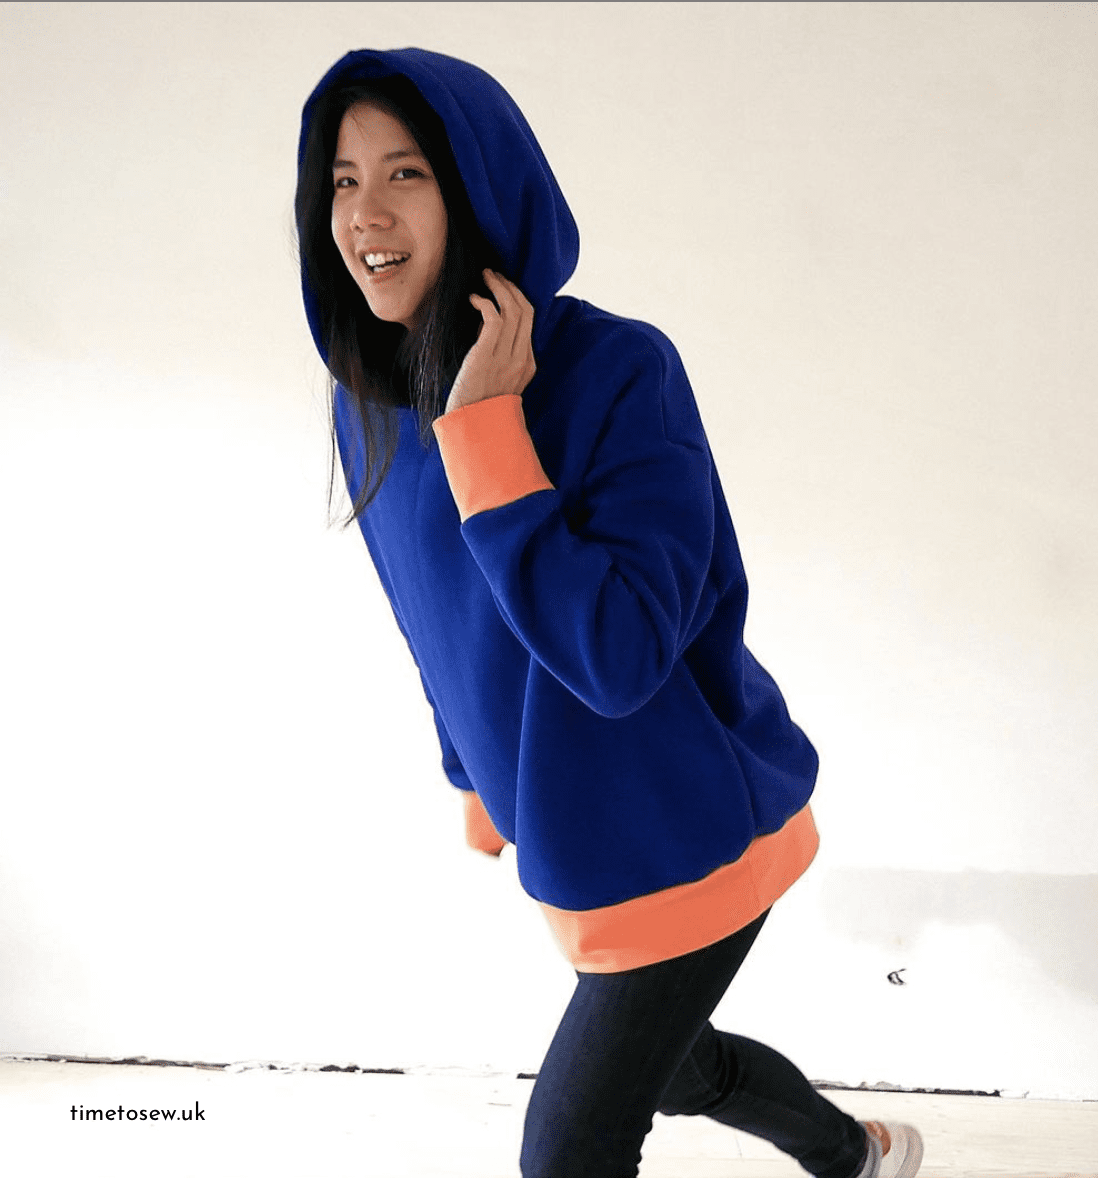 Fibre Mood Frikka in blue and orange sweatshirt fleece with a fibre blend of polyester and cotton made by Time to Sew